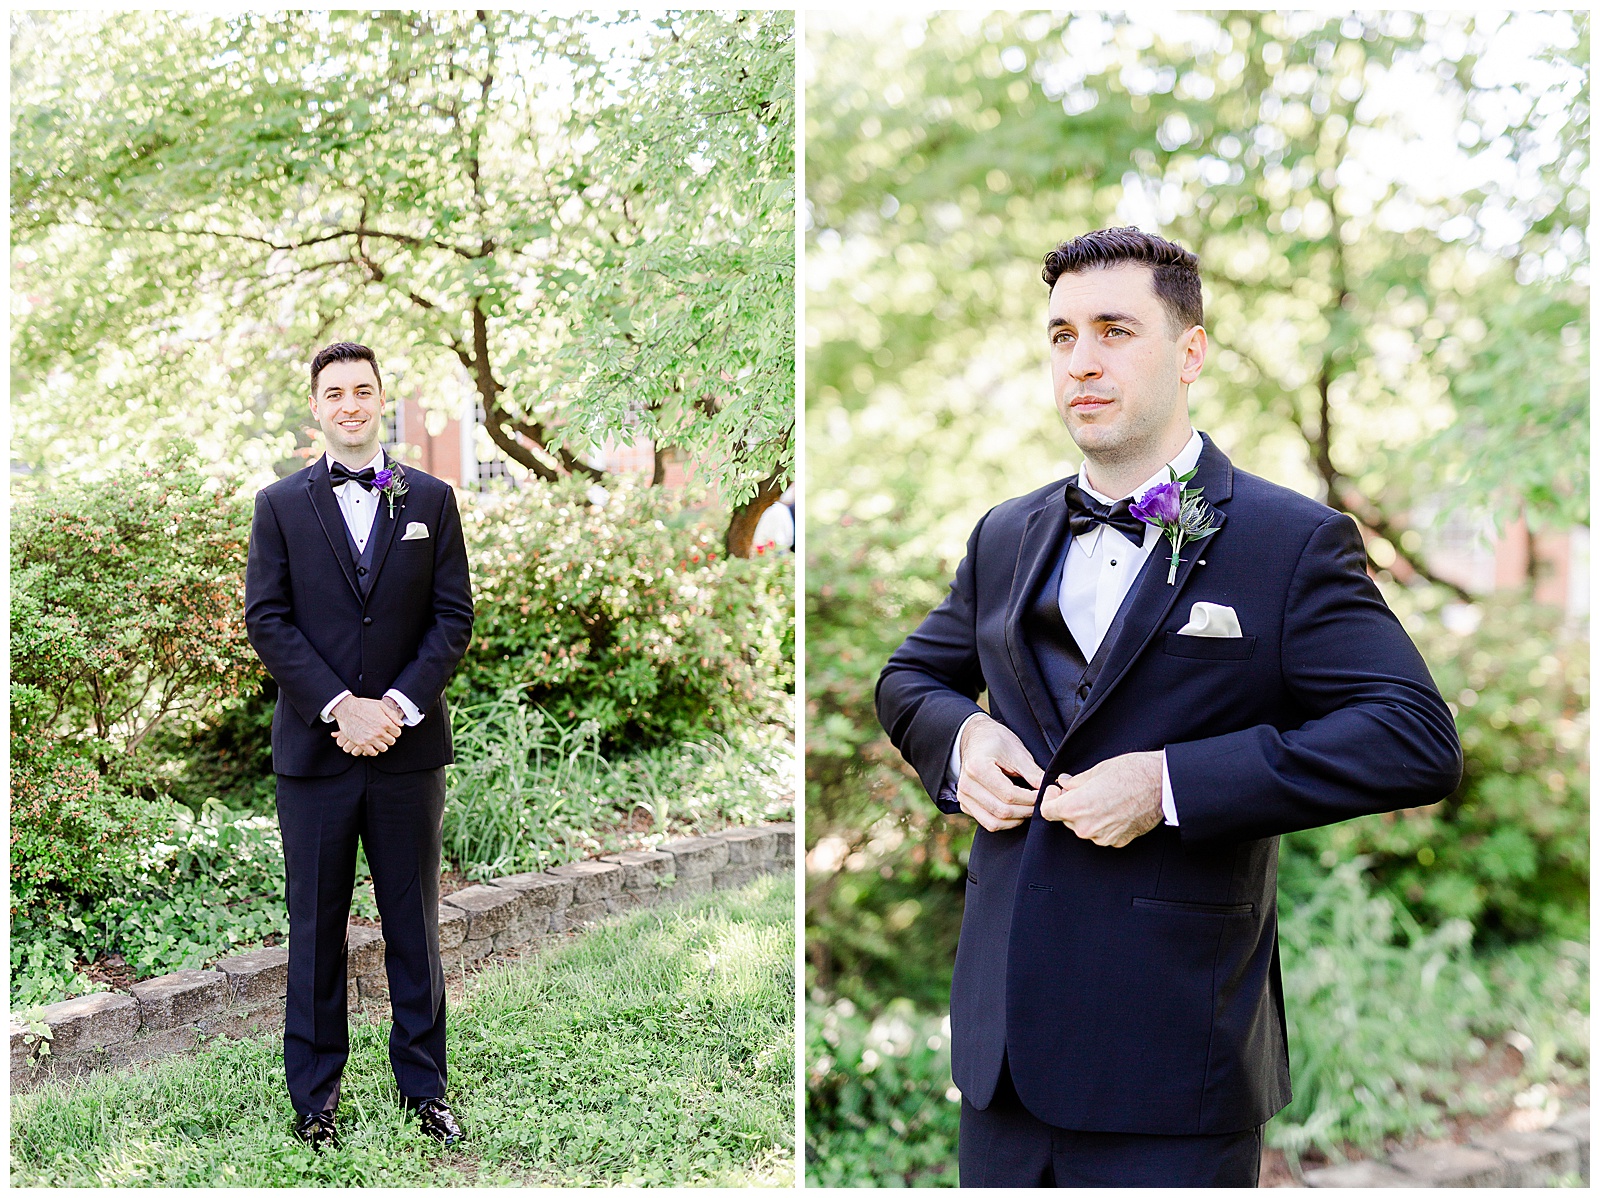 💍 groom portrait detail shots photo in black tux tuxedos and purple boutonniere 💍 Bright Colorful Summer City Wedding in Charlotte, NC with Taryn and Ryan | Kevyn Dixon Photography